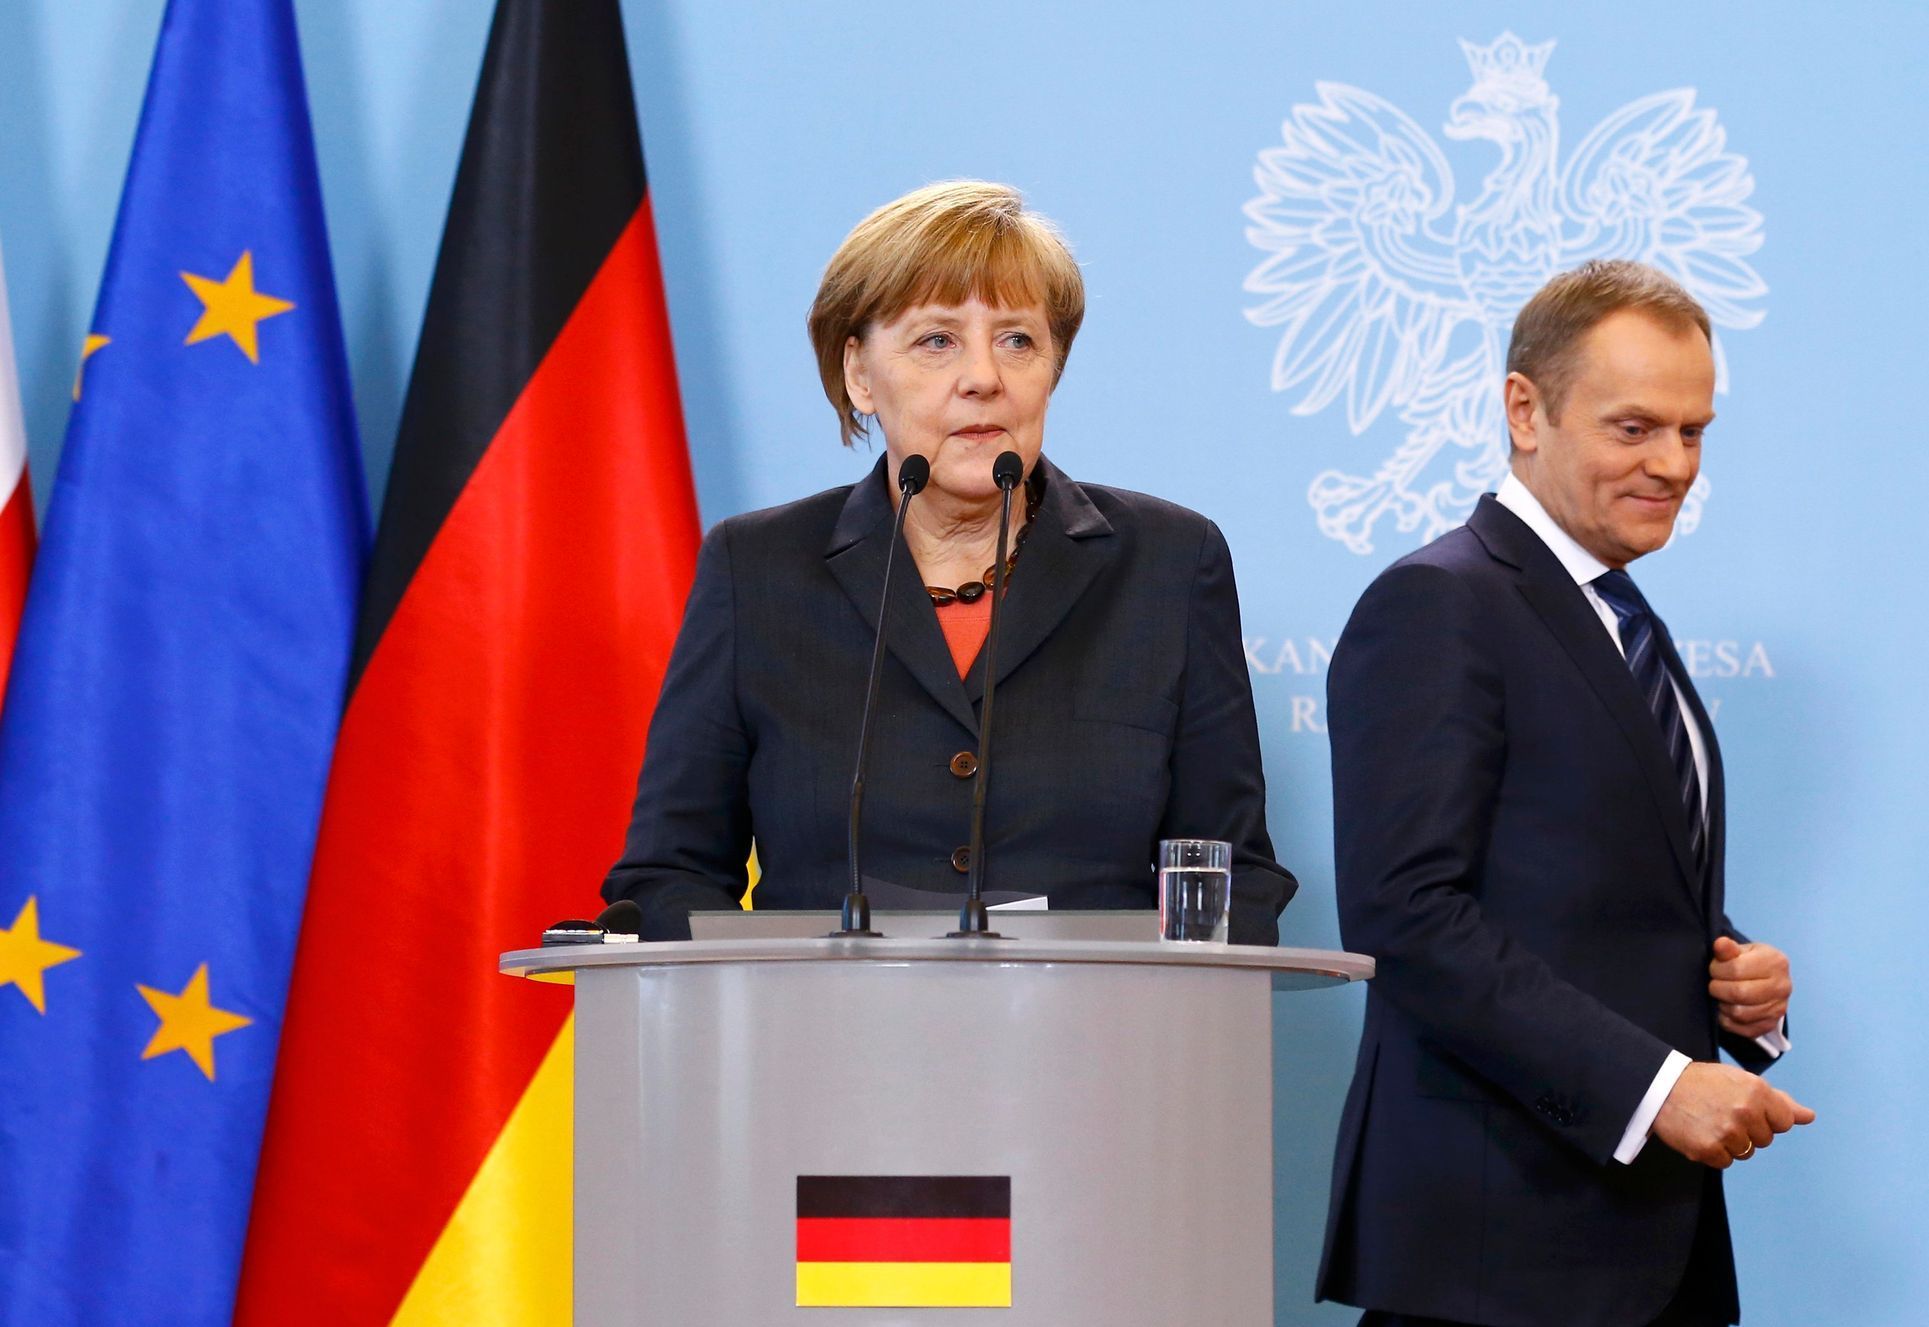 German Chancellor Merkel prepares to address to media as Polish PM Tusk looks on after their meeting in Warsaw